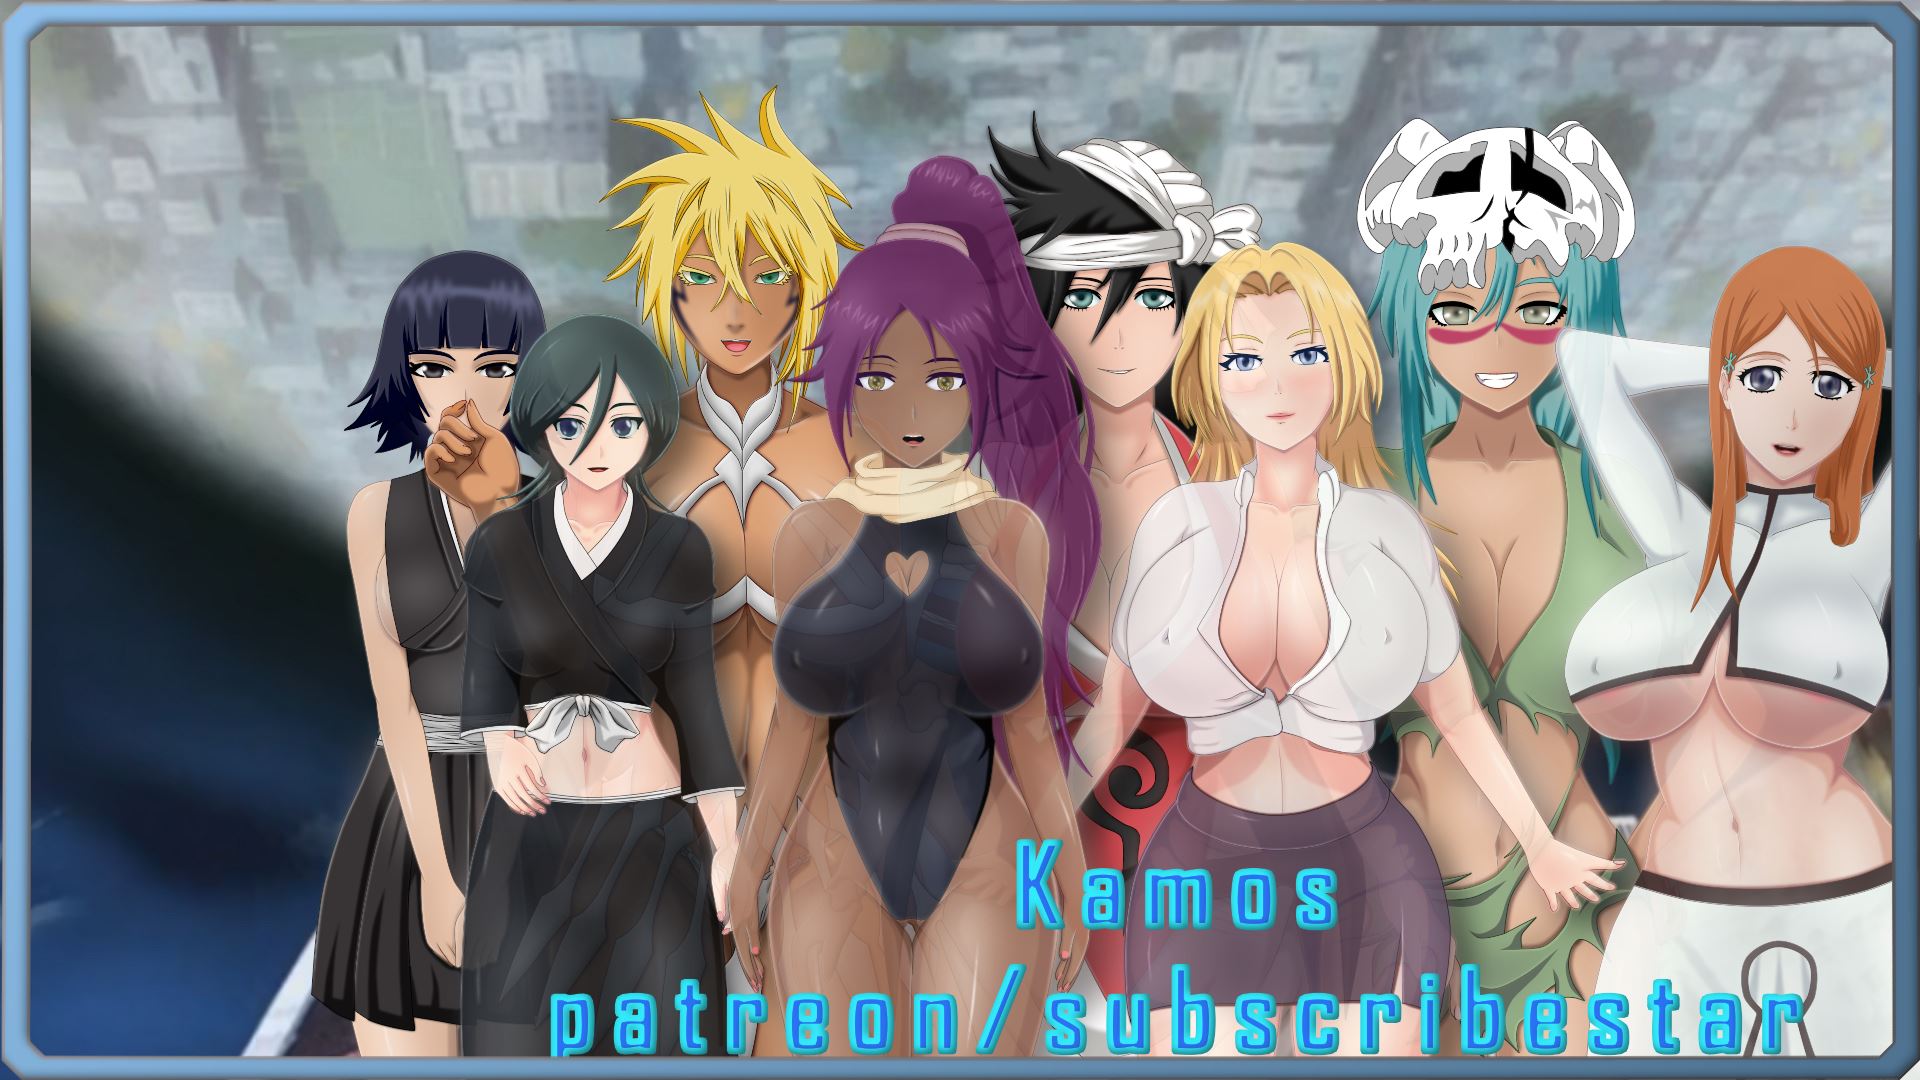 Shinigami brothel porn xxx game download cover